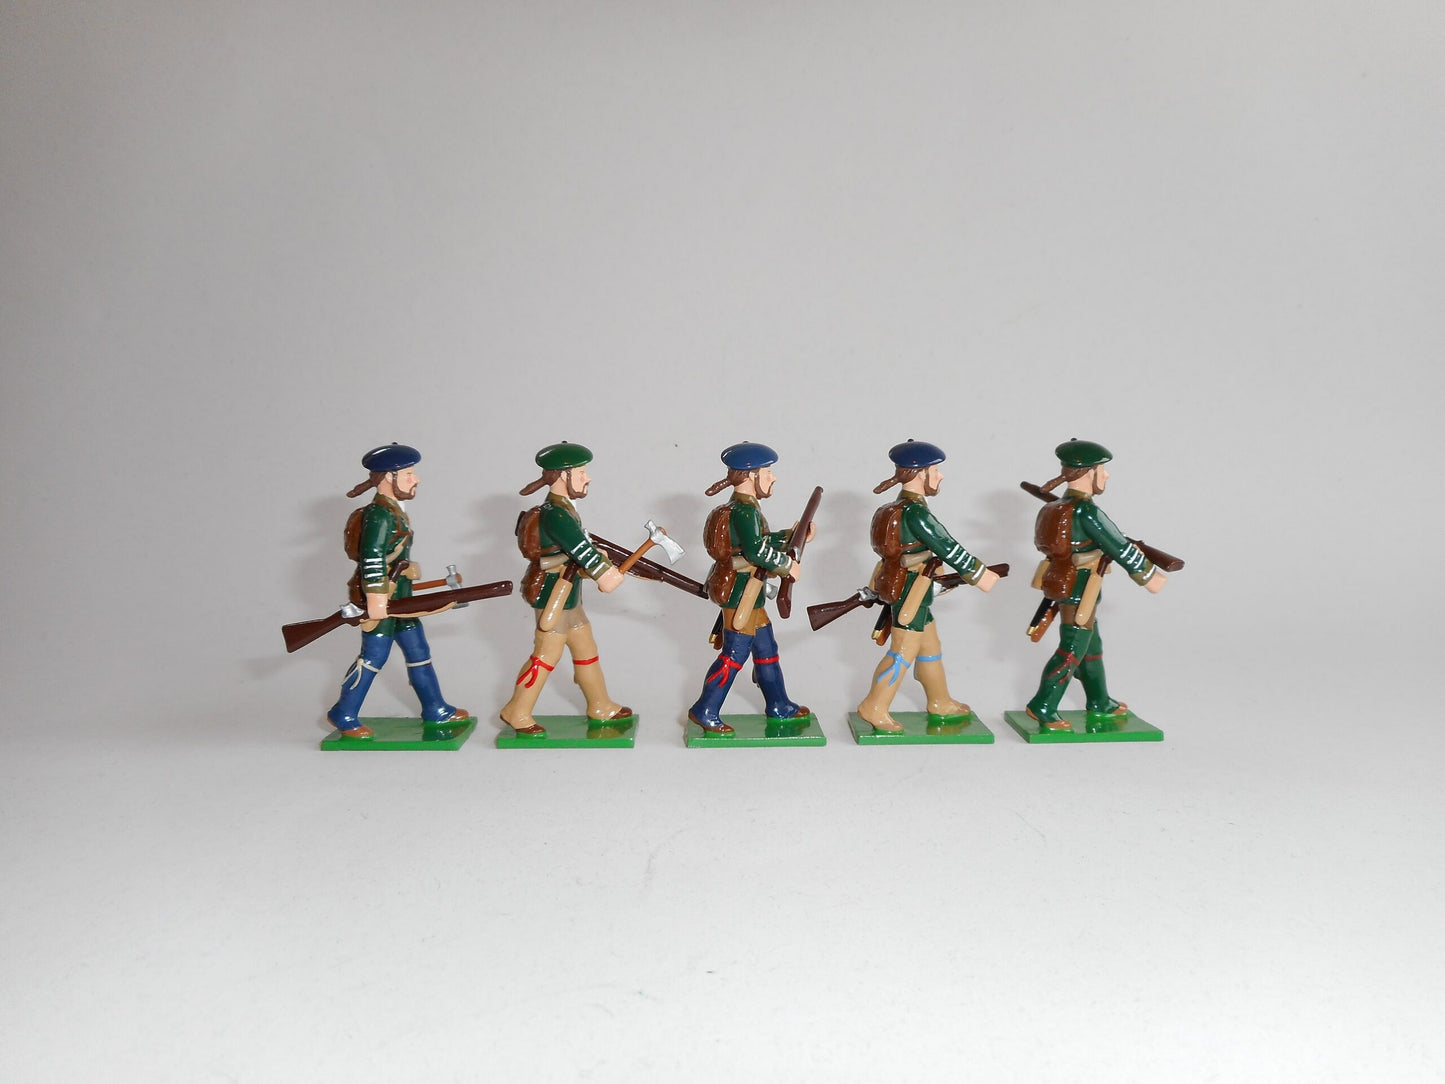 Collectible toy soldier miniature army men Rogers' Rangers figurines.